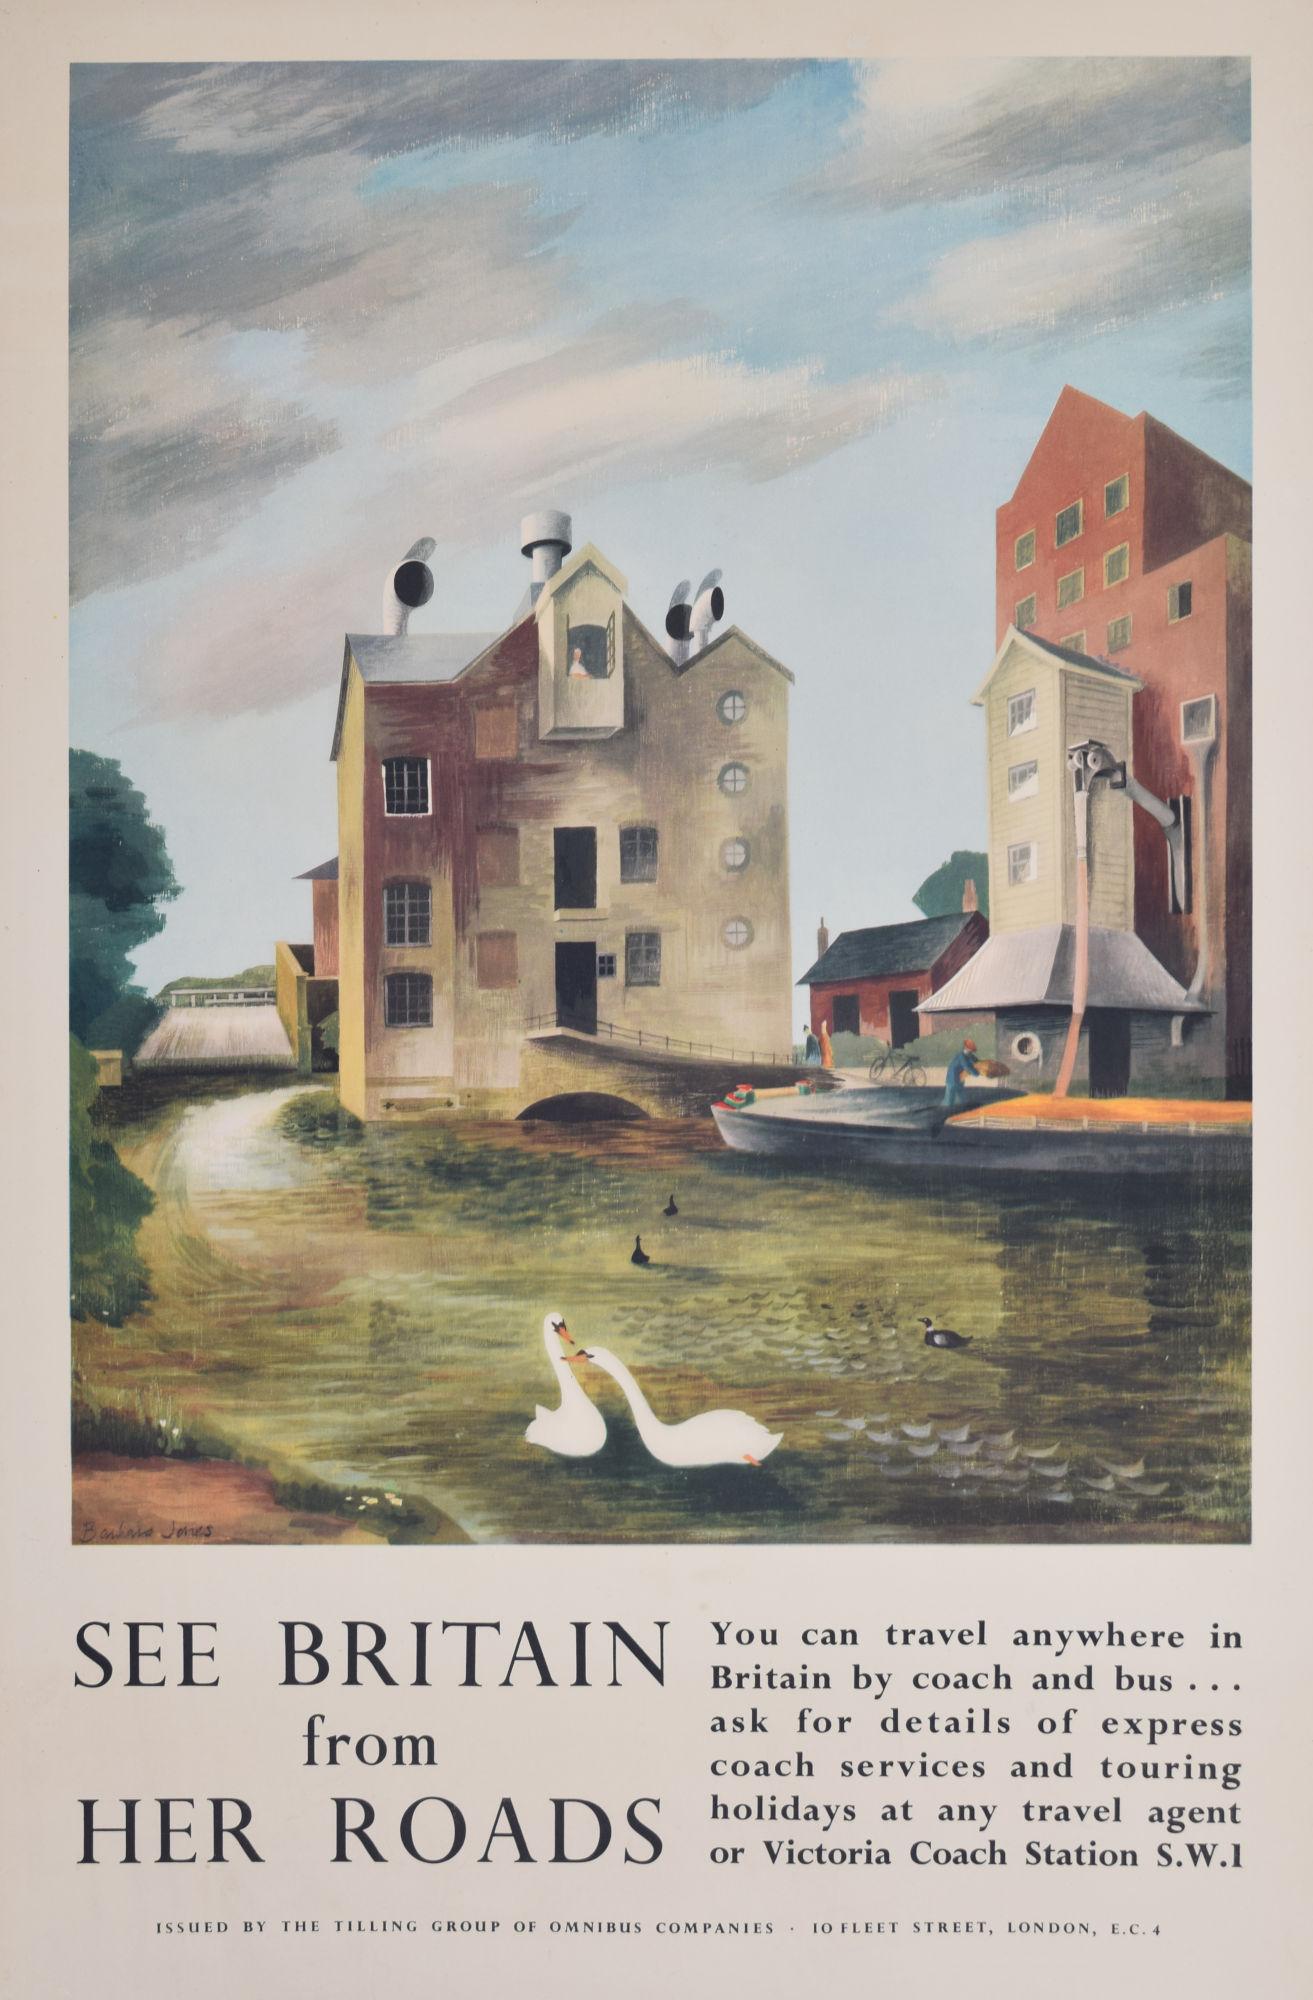 To see our other original vintage posters, scroll down to "More from this Seller" and below it click on "See all from this Seller" - or send us a message if you cannot find the poster you want.

Barbara Jones (1912 - 1978)
See Britain from Her